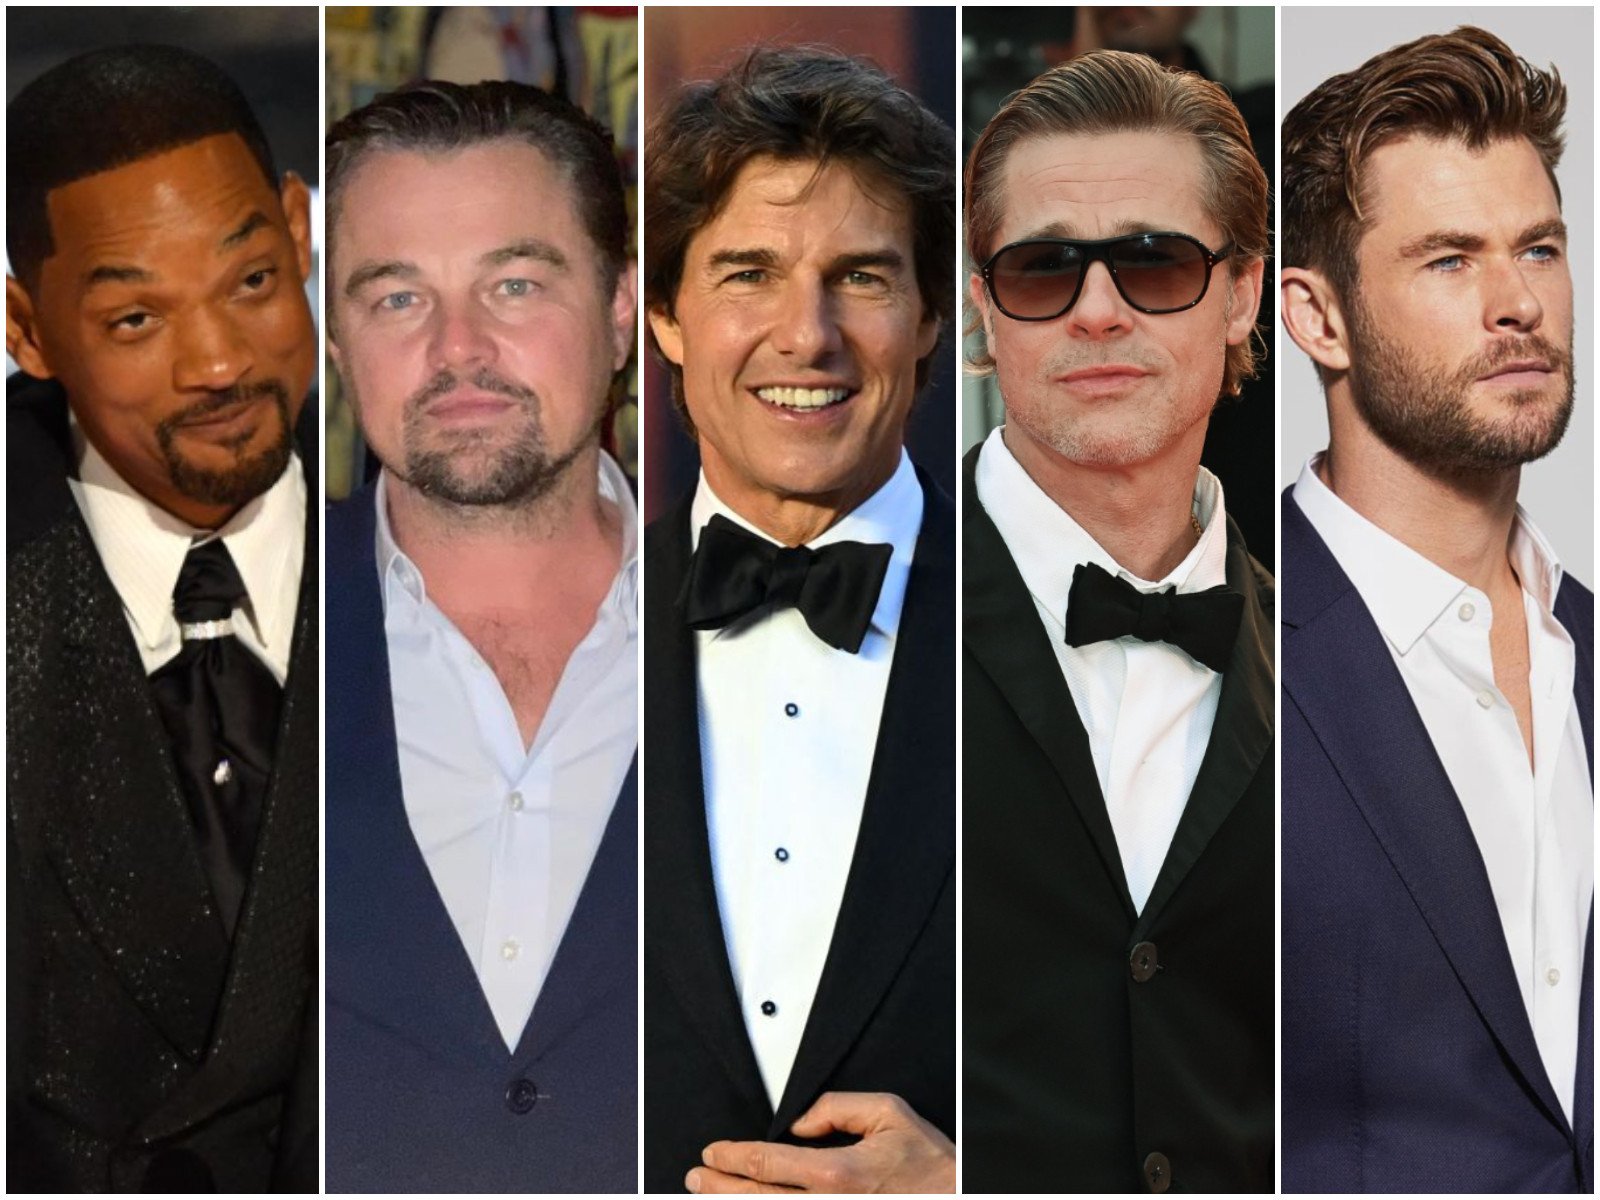 Will Smith, Leonardo DiCaprio, Tom Cruise, Brad Pitt and Chris Hemsworth all made millions in 2022 from film gigs, but who made the most? Photos: AFP; @leonardodicaprio, @chrishemsworth/Instagram; Getty Images